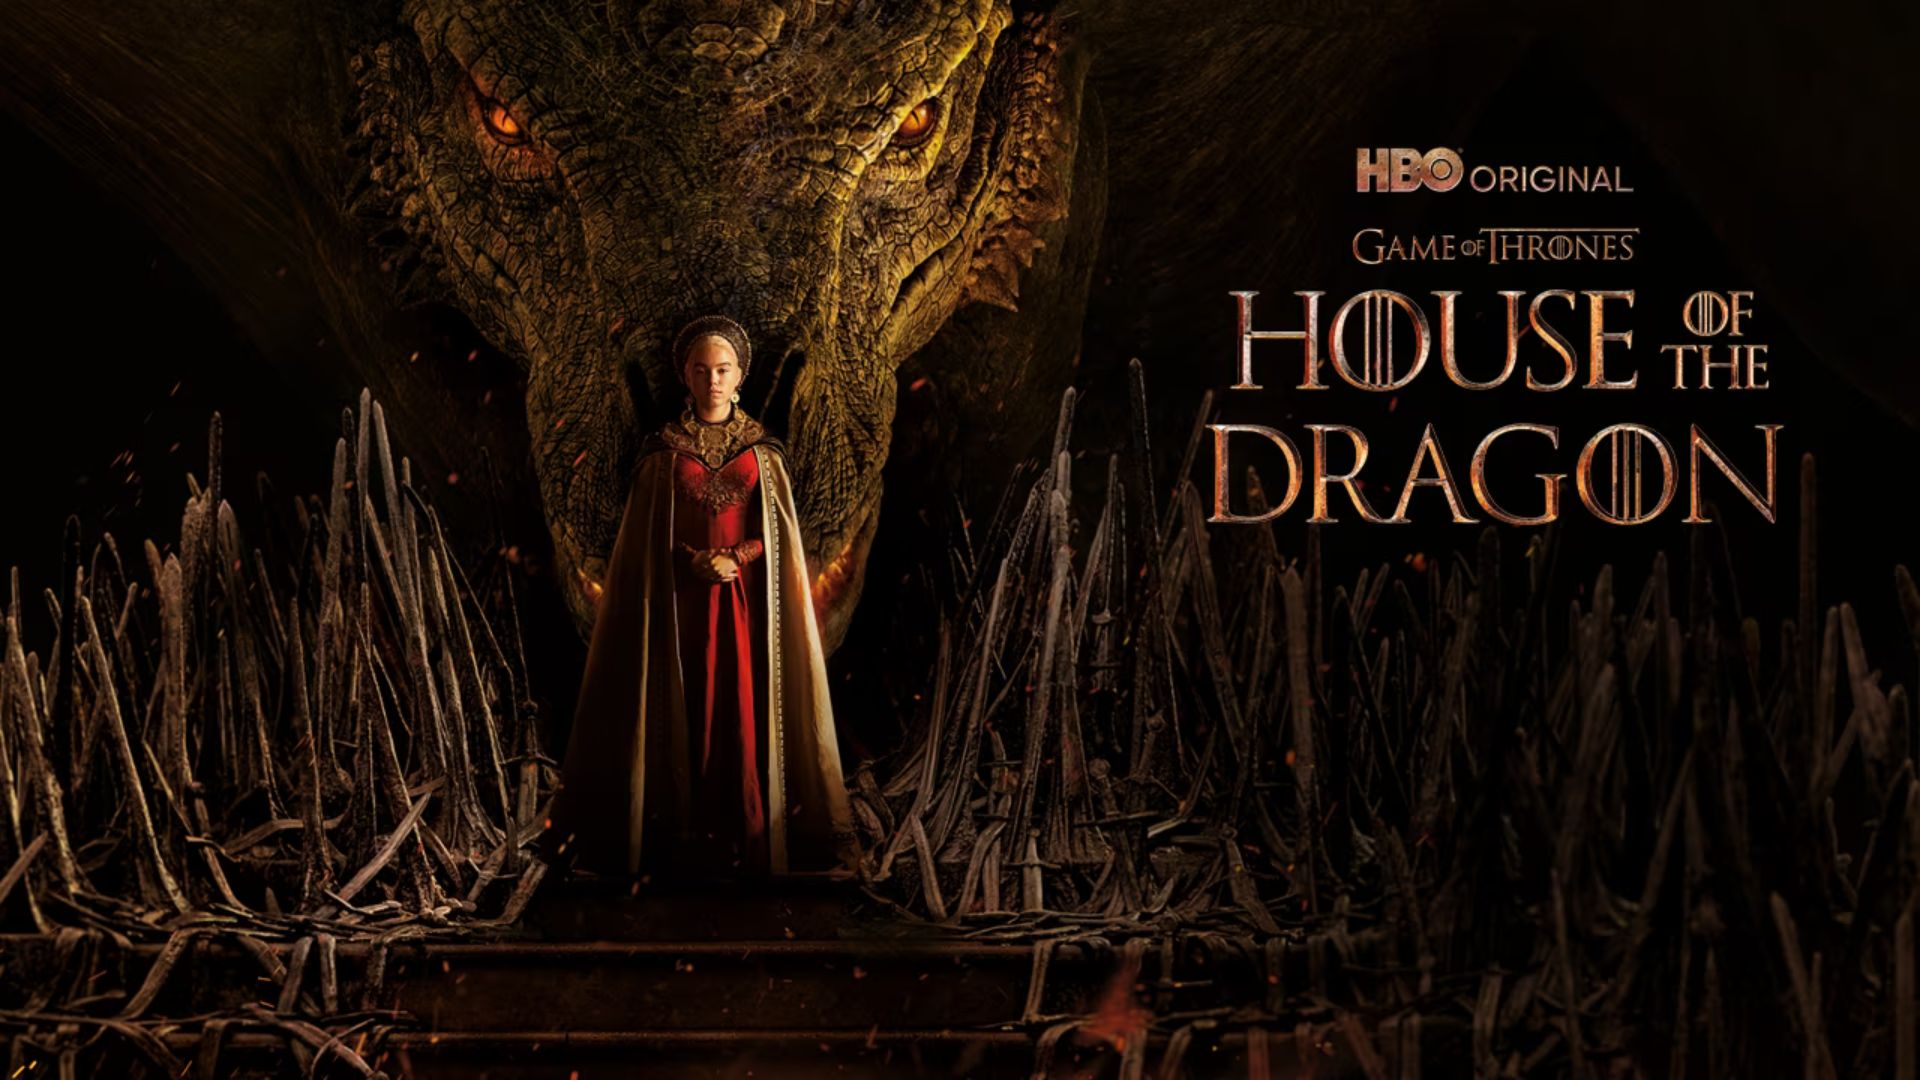 Where To Watch House of Dragon?